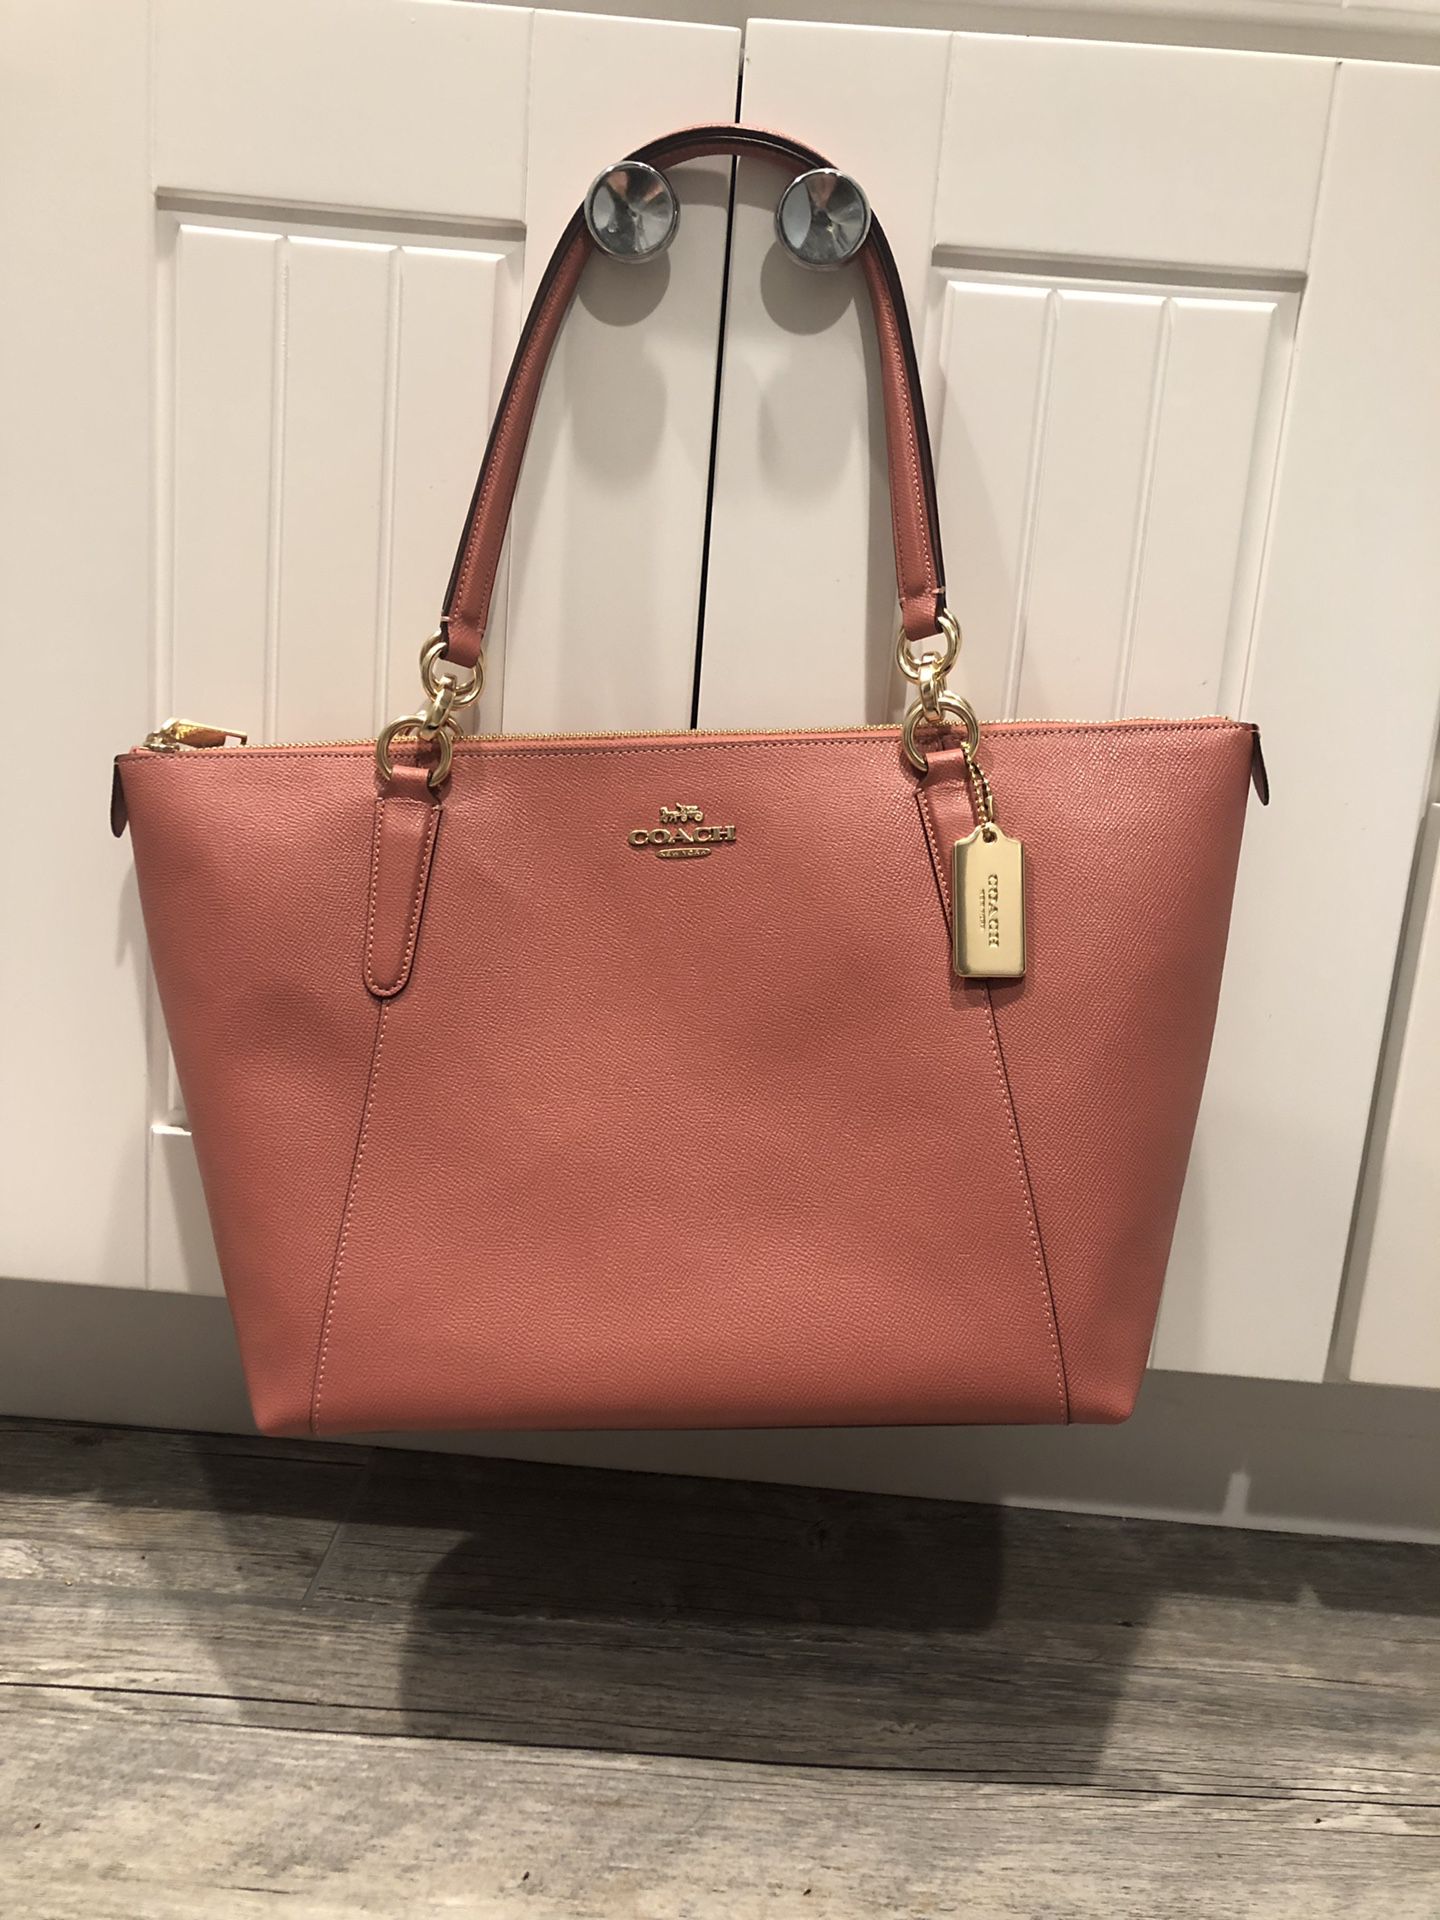 NEW Coach Large Ava Tote